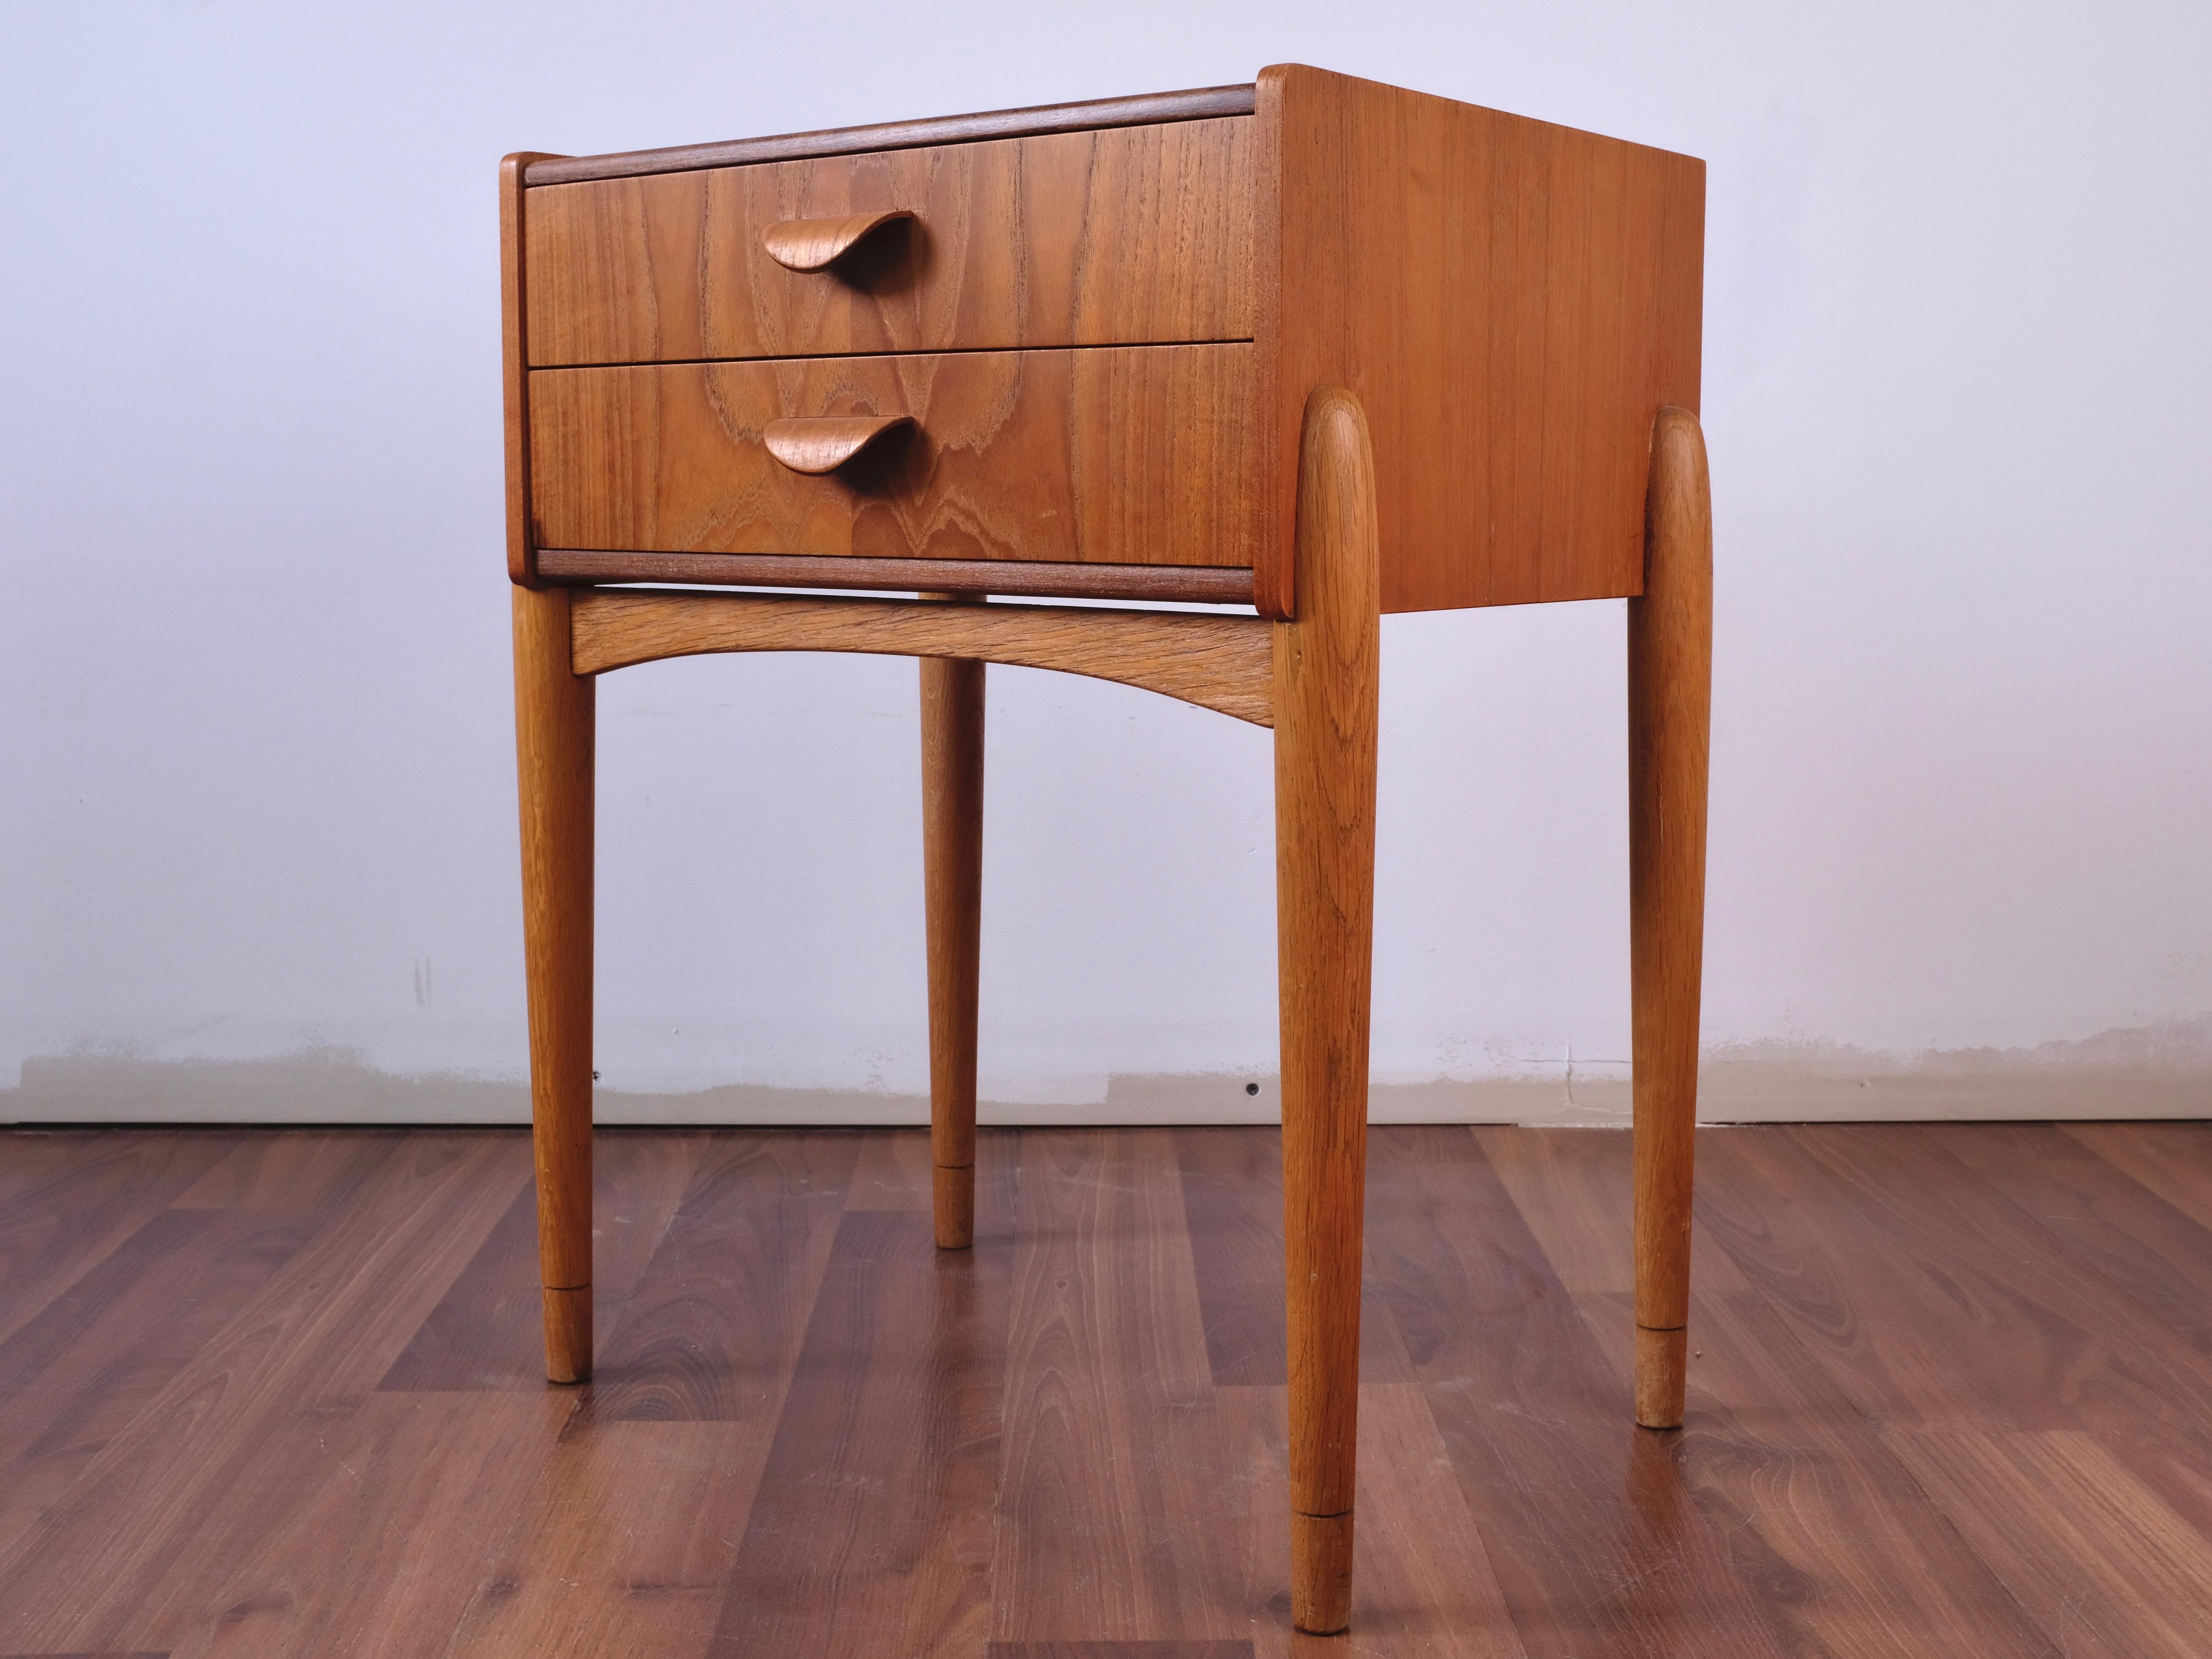 A beautiful teak bedside table with 2 drawers and curved molded teak handles. Very unique and visually as well as functionally attractive. Its 4 white oak dowel legs completes its authentic Mid-Century Modern visual appearance.